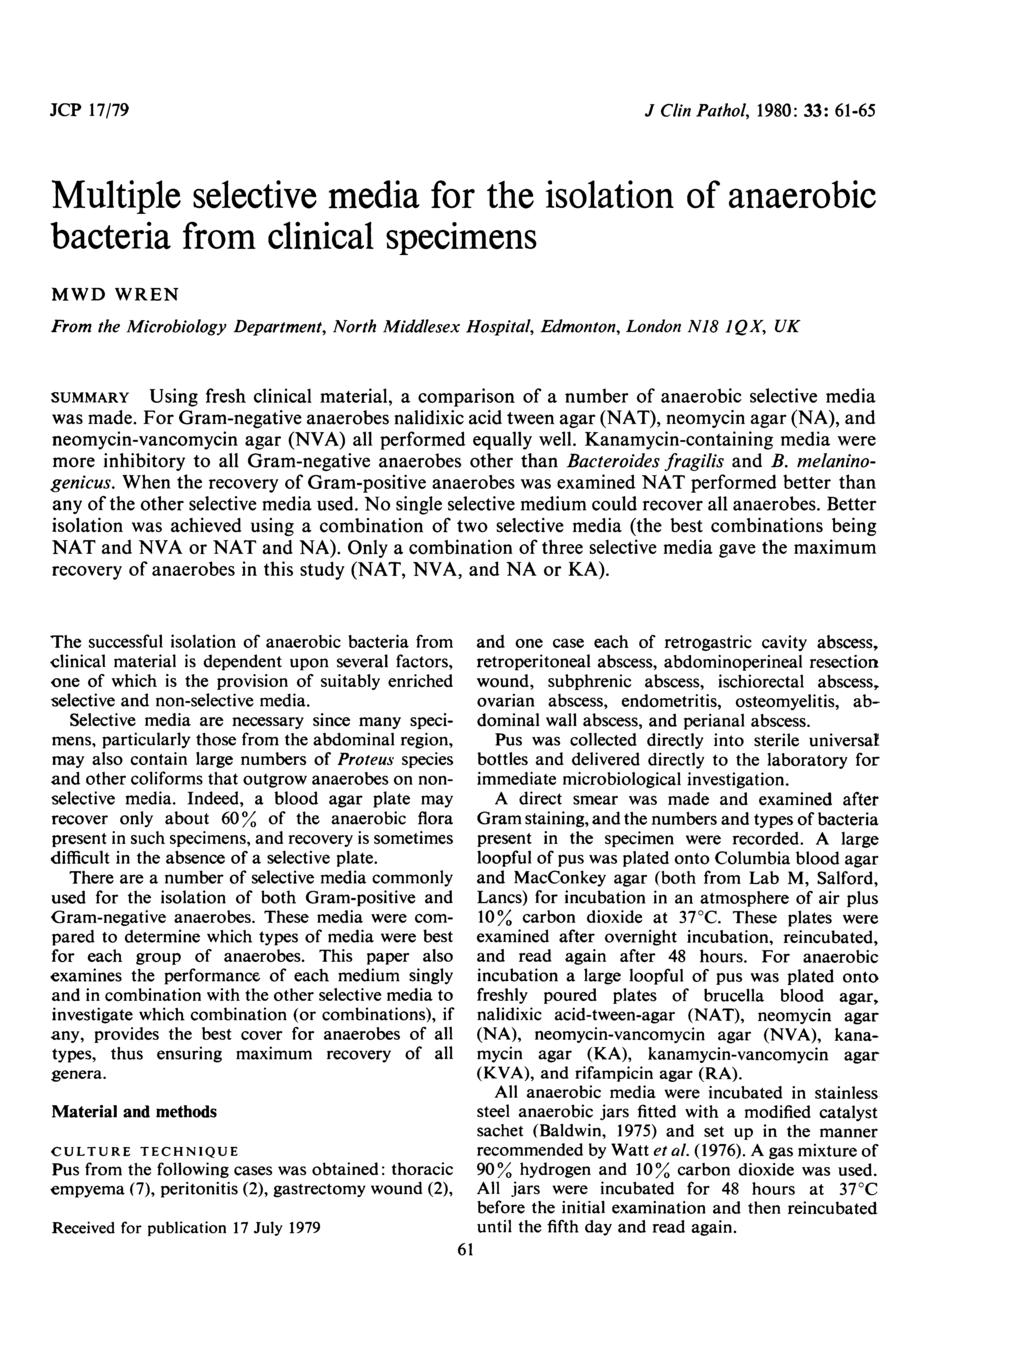 JCP 17/79 J Clin Pathol, 1980: 33: 61-65 Multiple selective media for the isolation of anaerobic bacteria from clinical specimens MWD WREN From the Microbiology Department, North Middlesex Hospital,